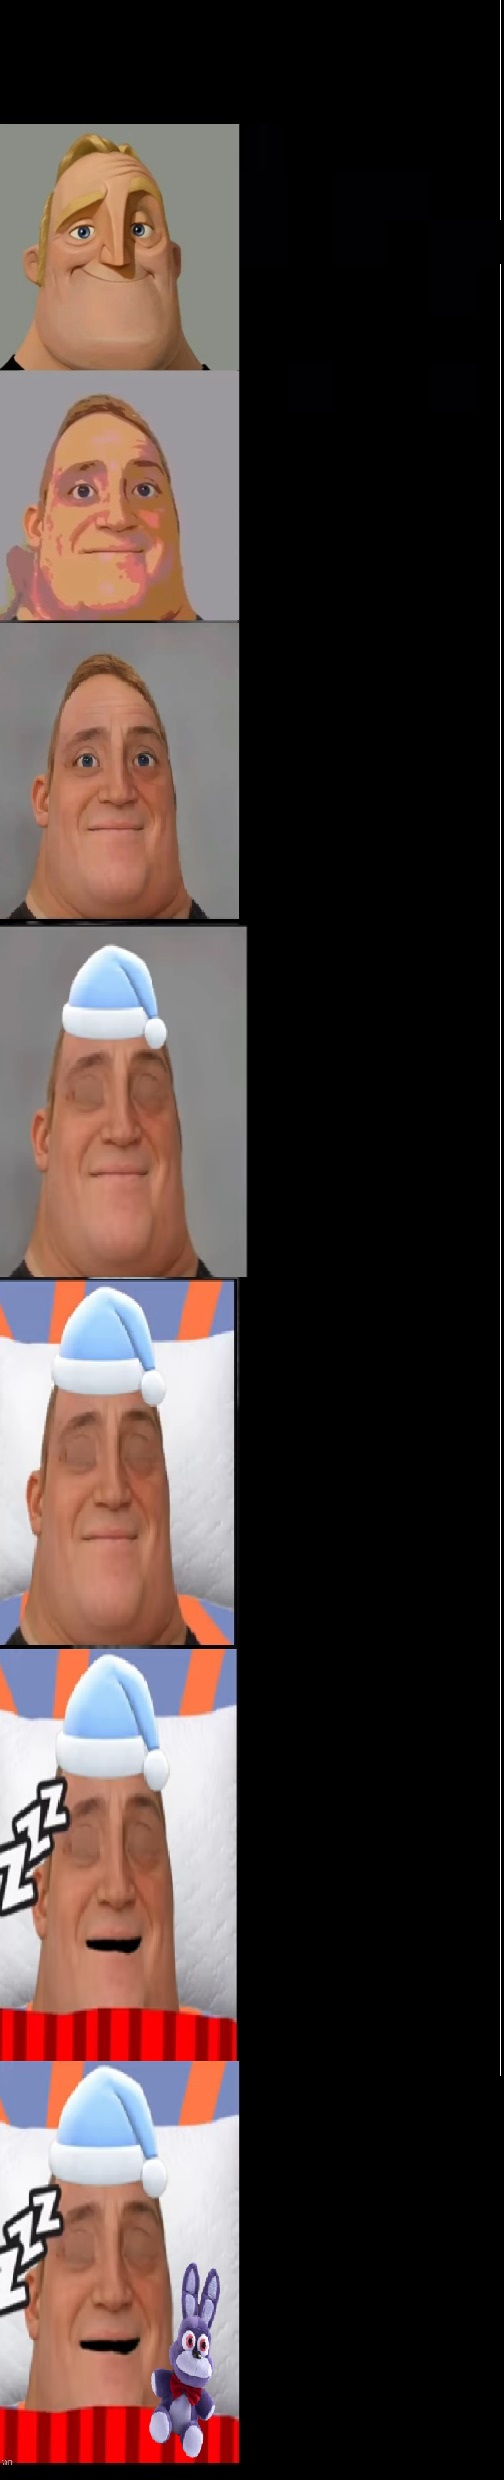 High Quality mr incredible becoming sleepy extended Blank Meme Template